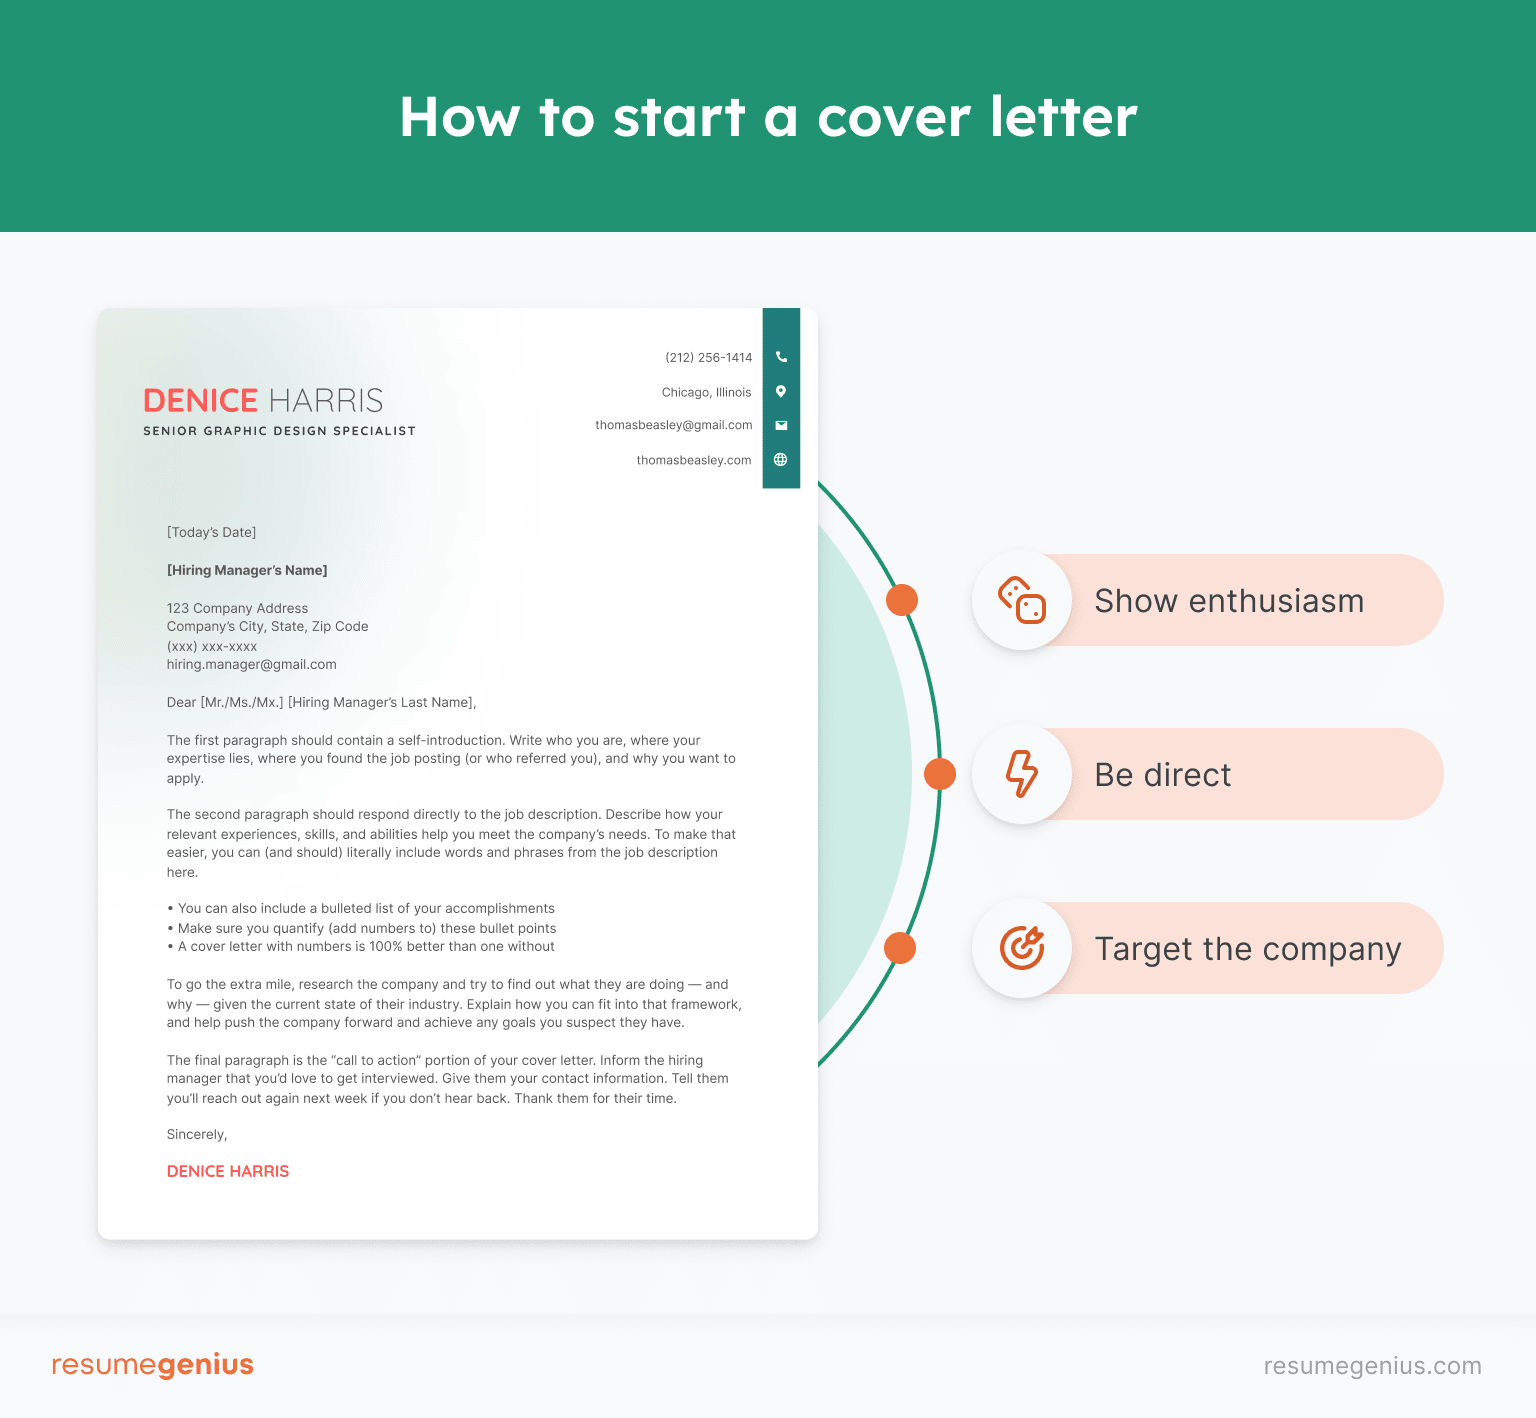 Infographic demonstrating how to start a cover letter